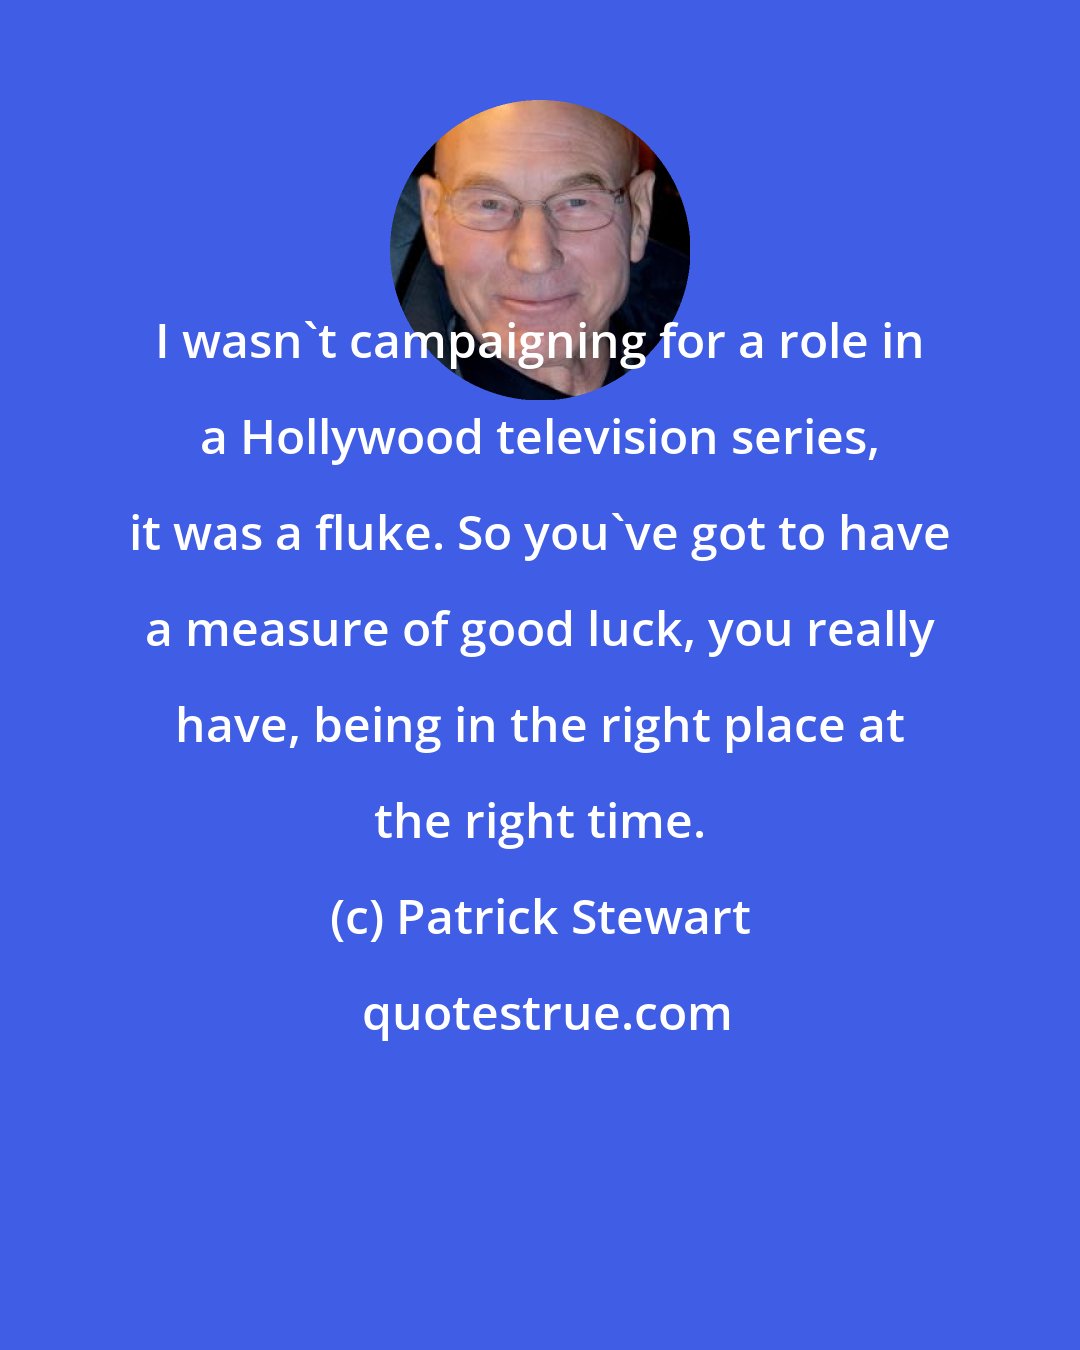 Patrick Stewart: I wasn't campaigning for a role in a Hollywood television series, it was a fluke. So you've got to have a measure of good luck, you really have, being in the right place at the right time.